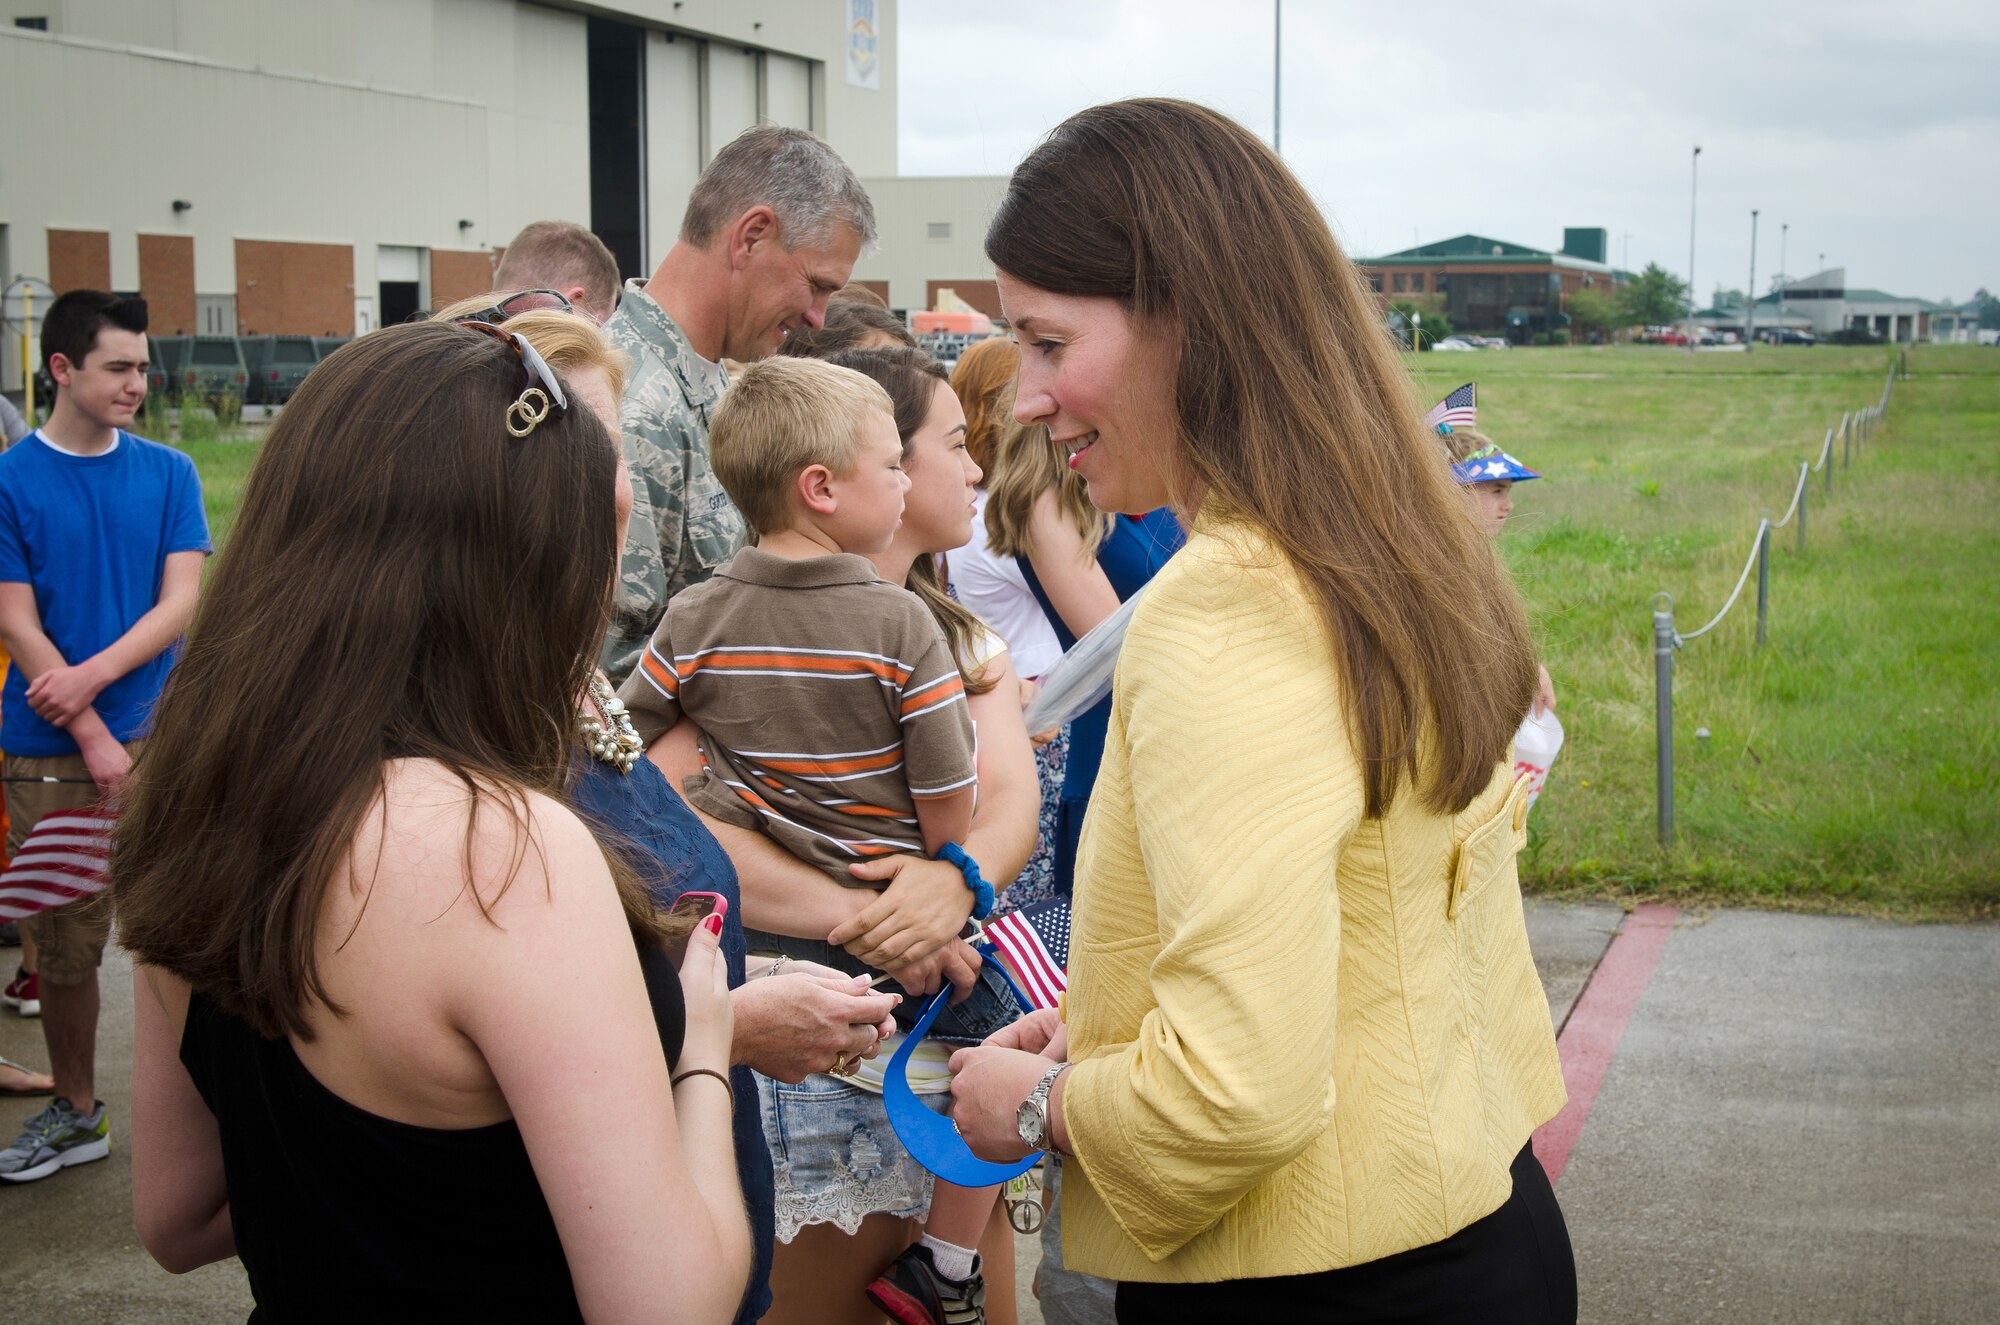 Alison Lundergan Grimes, Kentucky's secretary of state, talks to family members of Airmen from the 123rd Airlift Wing Airmen during a homecoming ceremony at the Kentucky Air National Guard Base in Louisville, Ky., July 8, 2015. Thirty Kentucky Air Guardsmen returned from a deployment to the Persian Gulf Region, where they’ve been supporting Operation Freedom’s Sentinel since February. (U.S. Air National Guard photo by Master Sgt. Phil Speck)